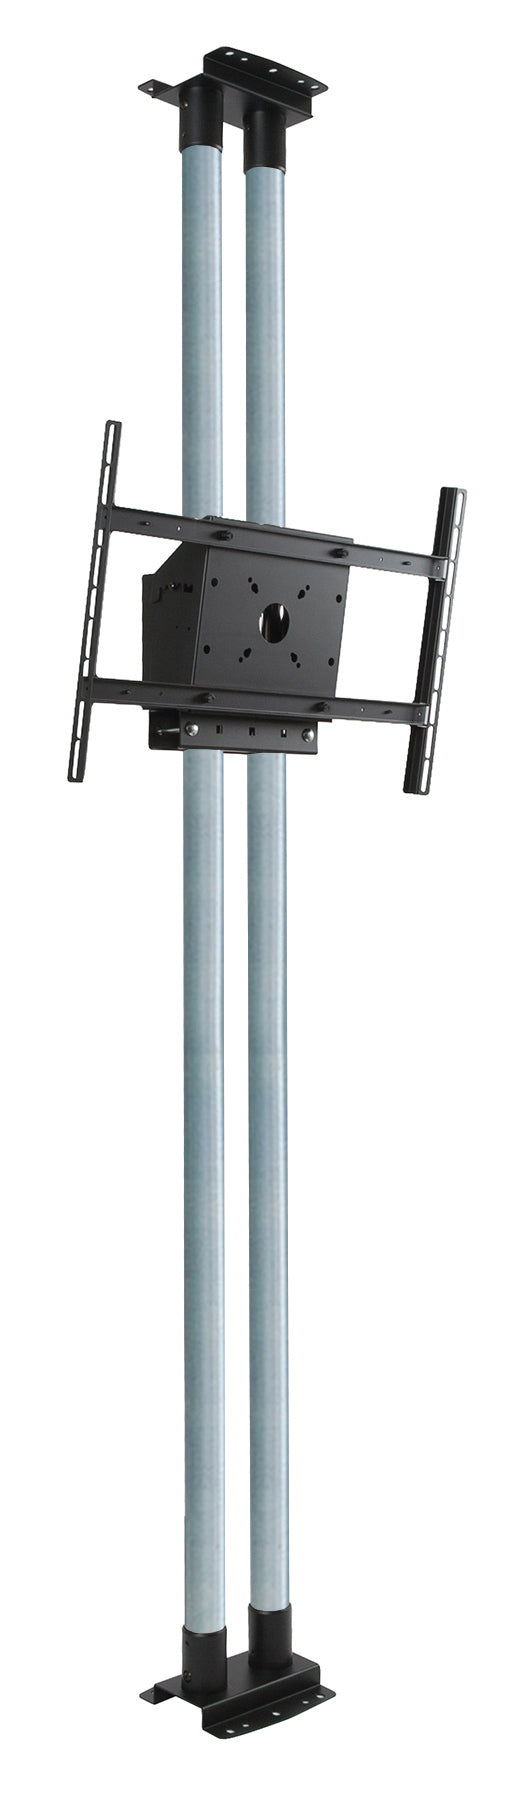 Modular Dual Pole Floor To Ceiling Mount Kit For 46